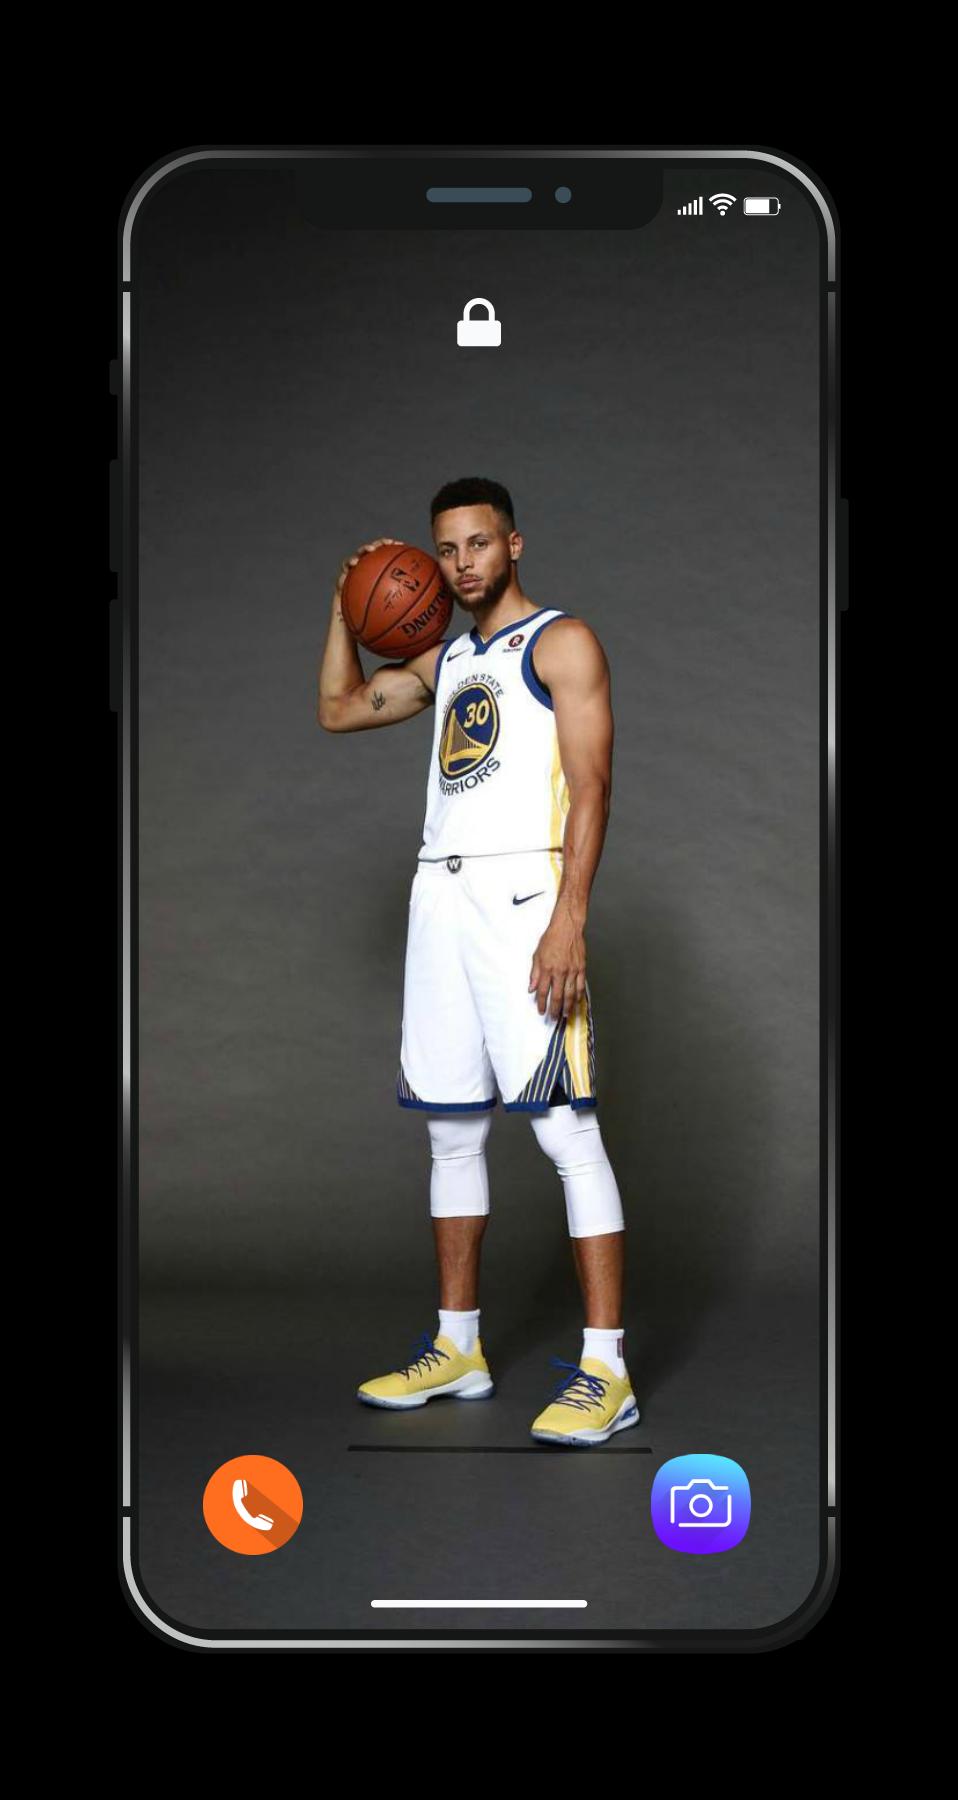 Android 用の Stephen Curry Wallpapers Hd 4k Curry Photos Apk をダウンロード